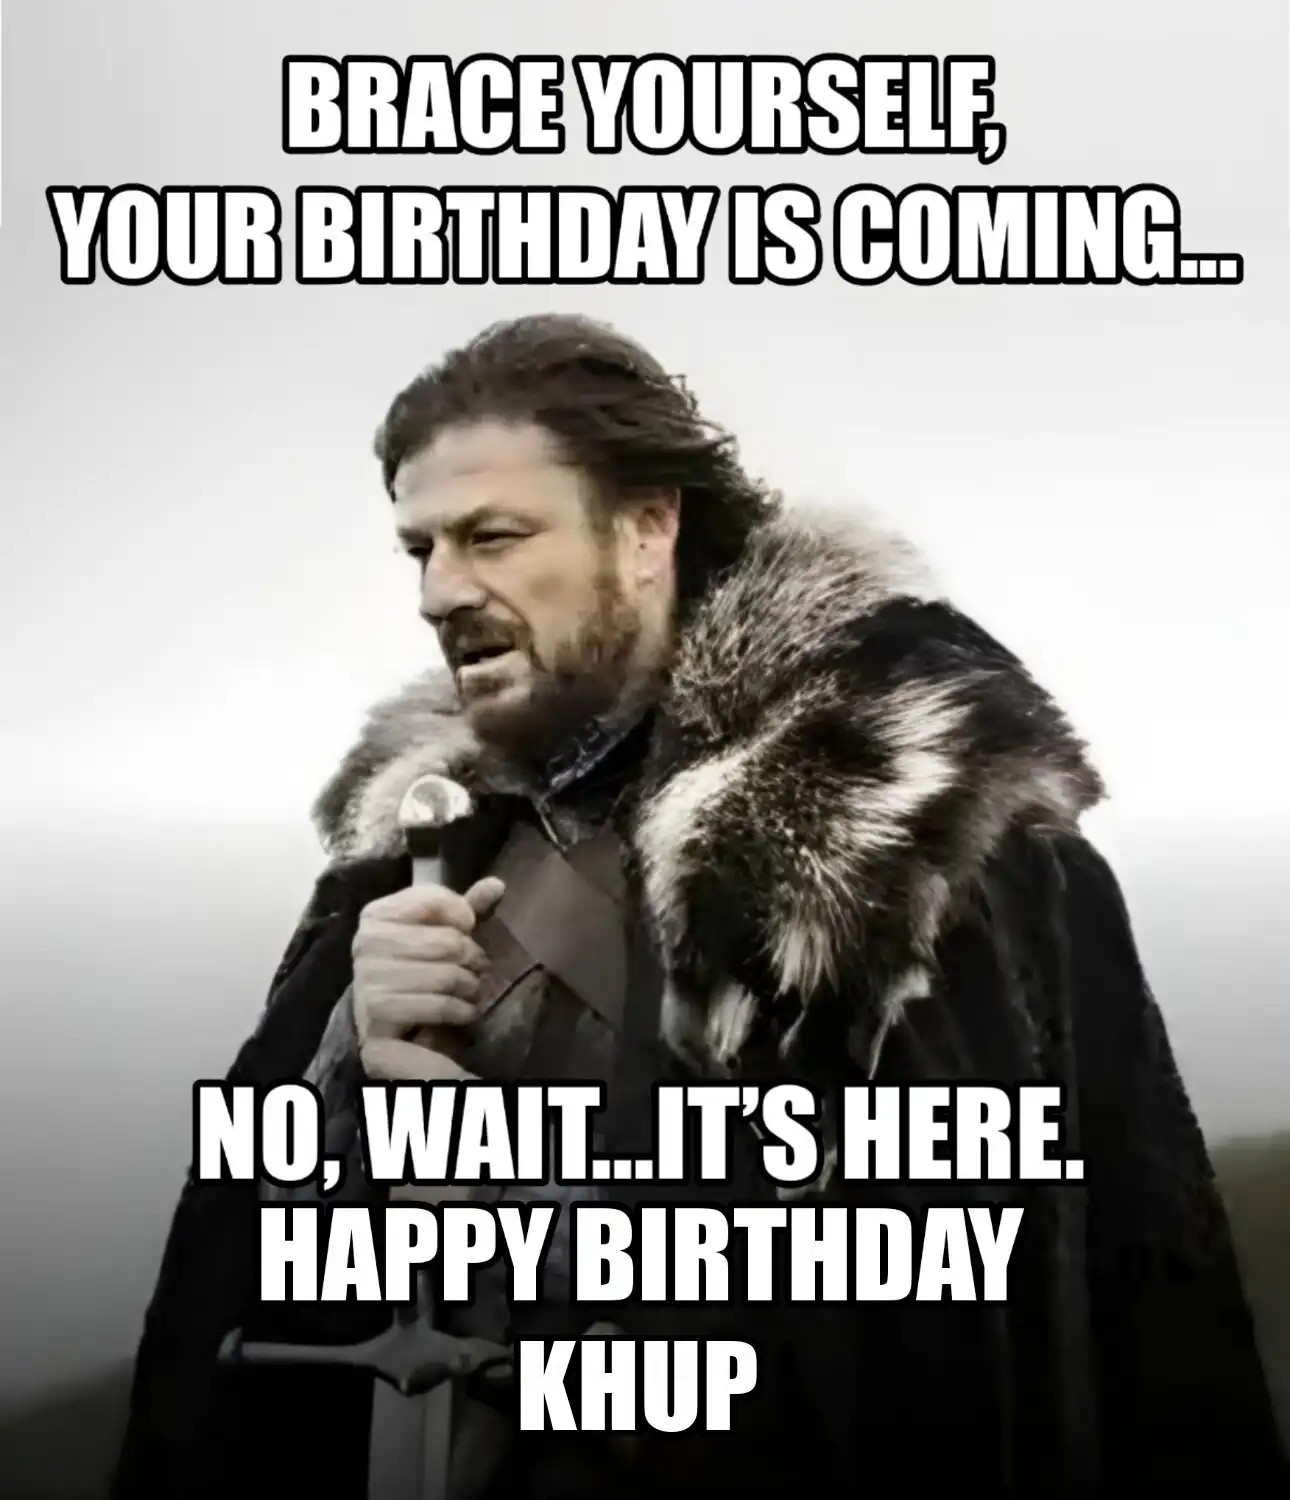 Happy Birthday Khup Brace Yourself Your Birthday Is Coming Meme